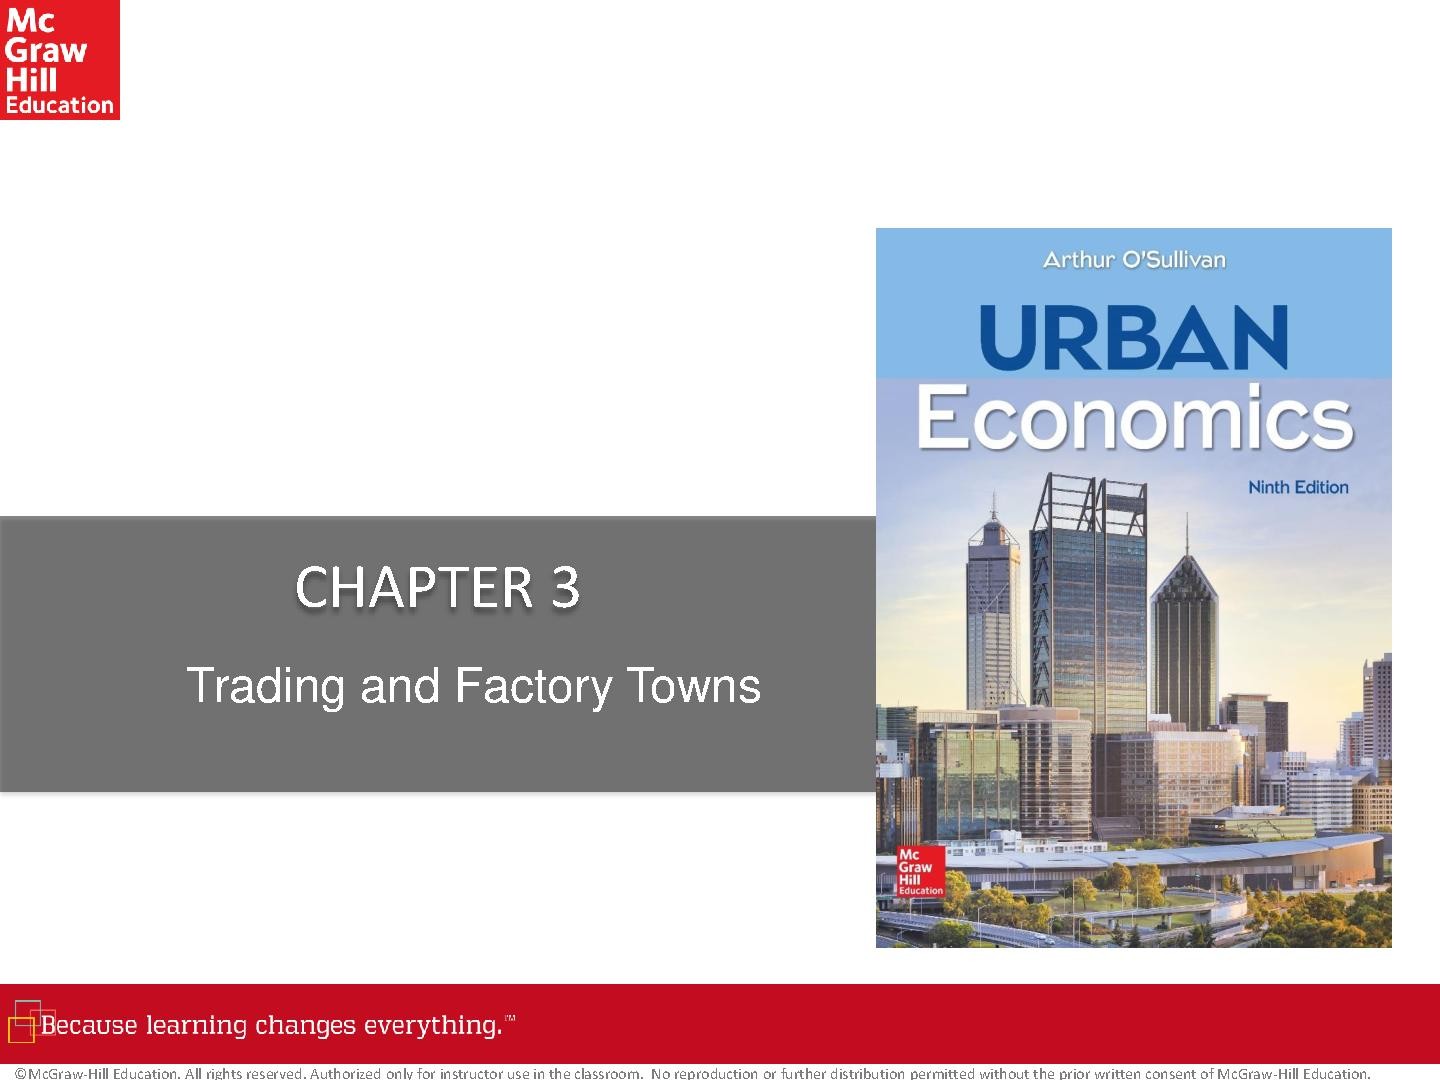 CHAPTER 3: Trading and Factory Towns